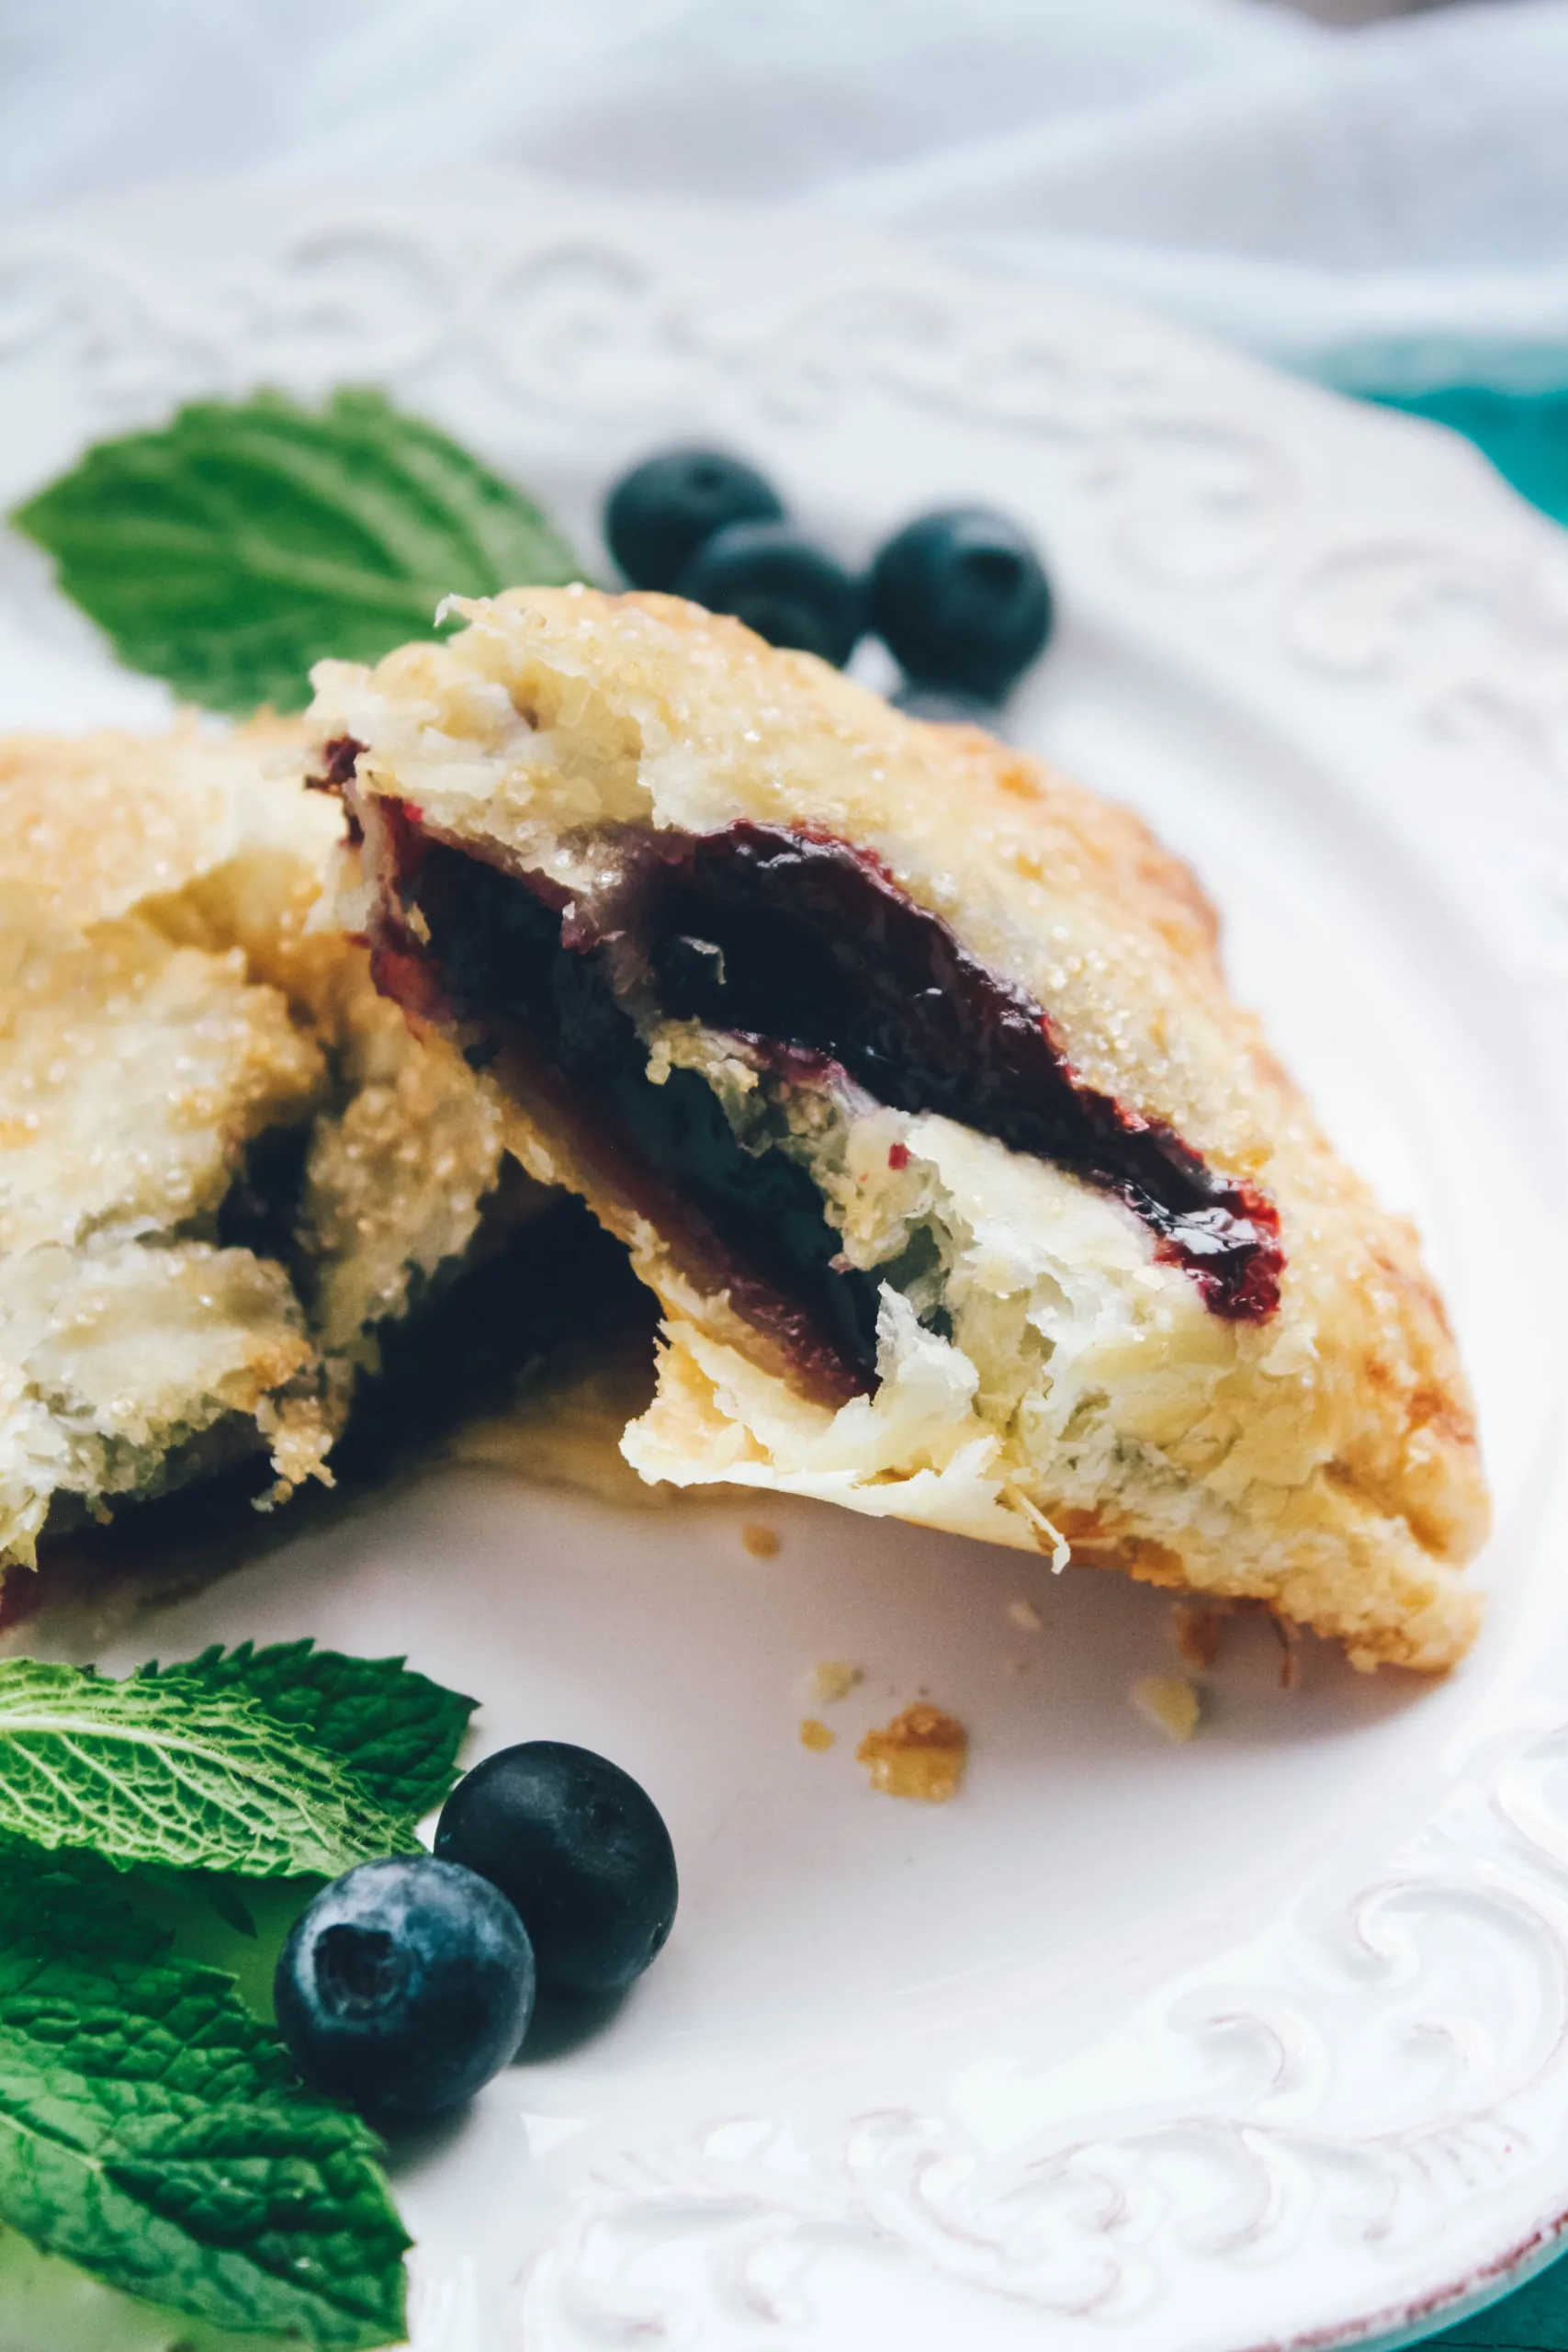 Blueberry Mint Hand Pies are a special treat for the season!